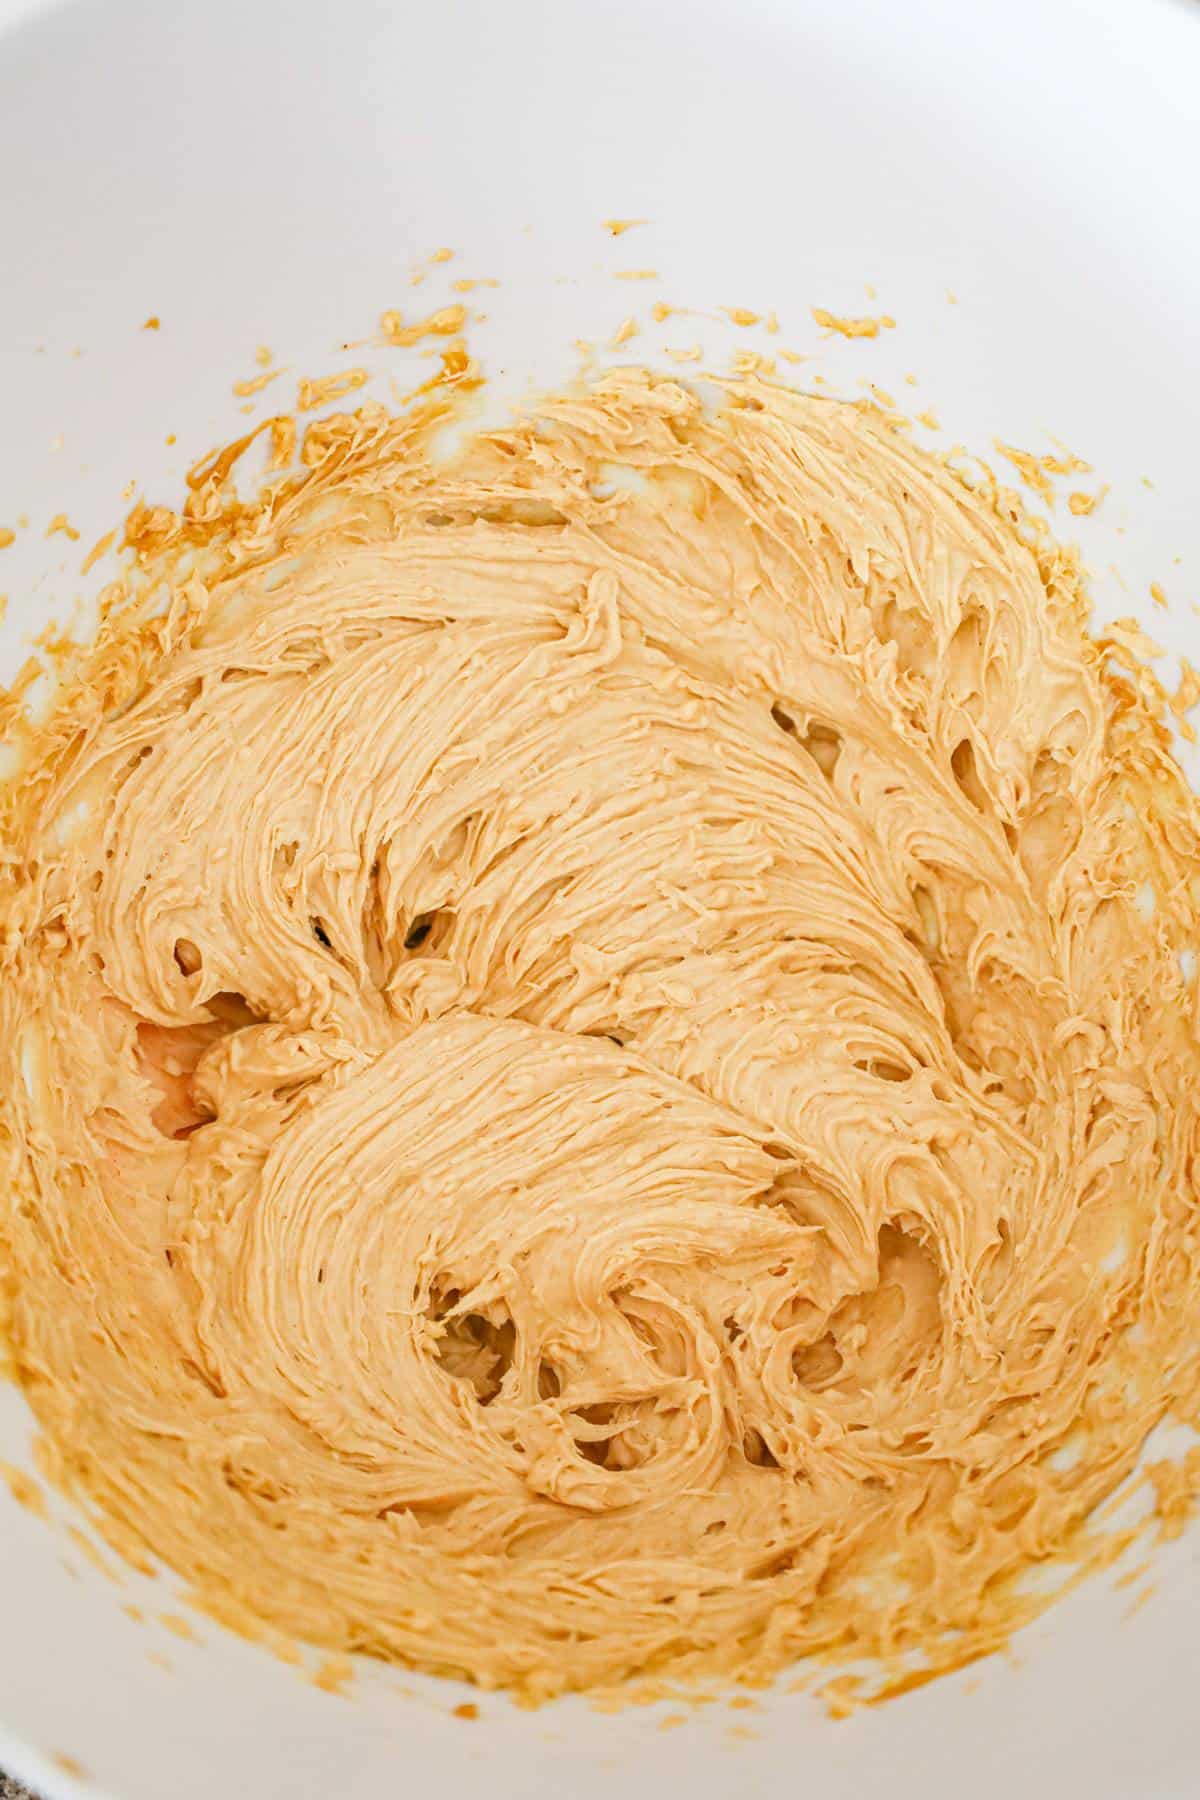 creamy peanut butter and butter mixture in a mixing bowl